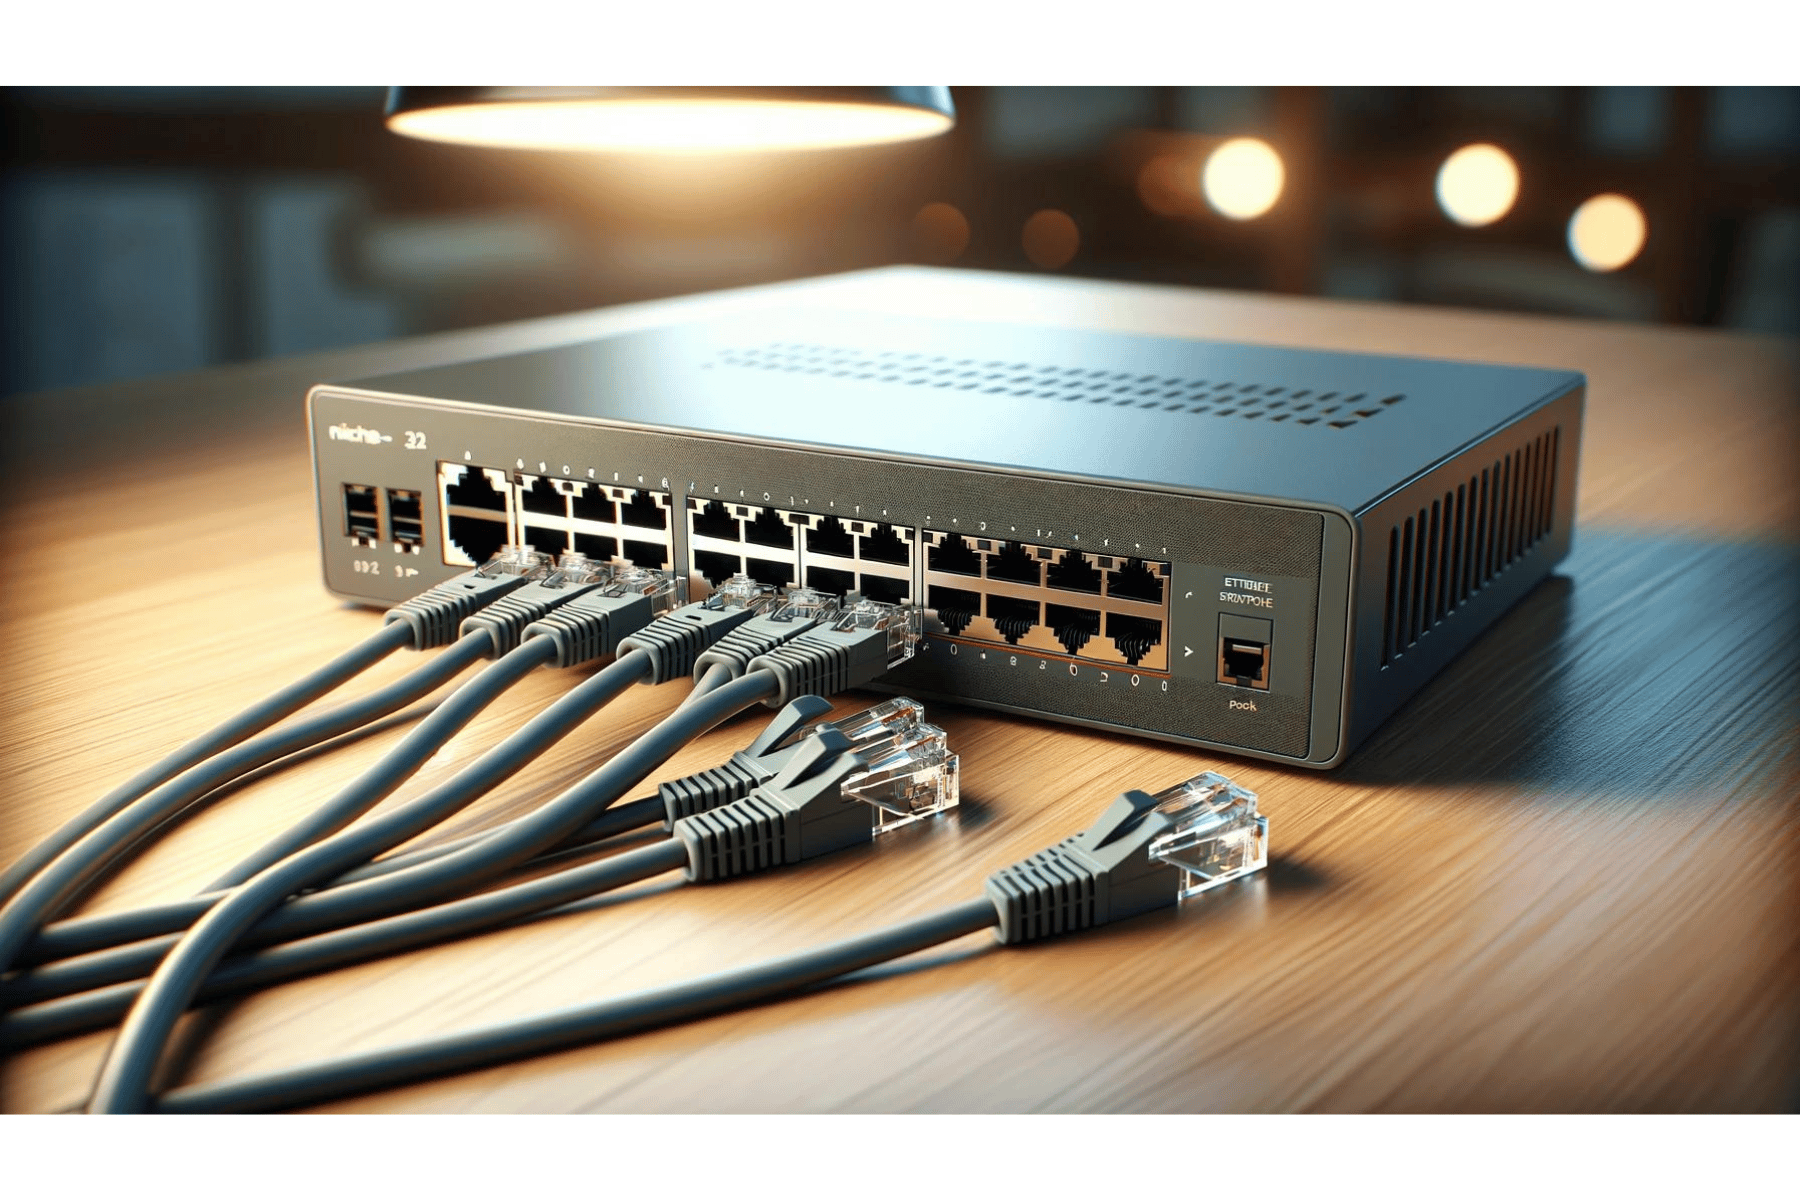 What is an Ethernet switch